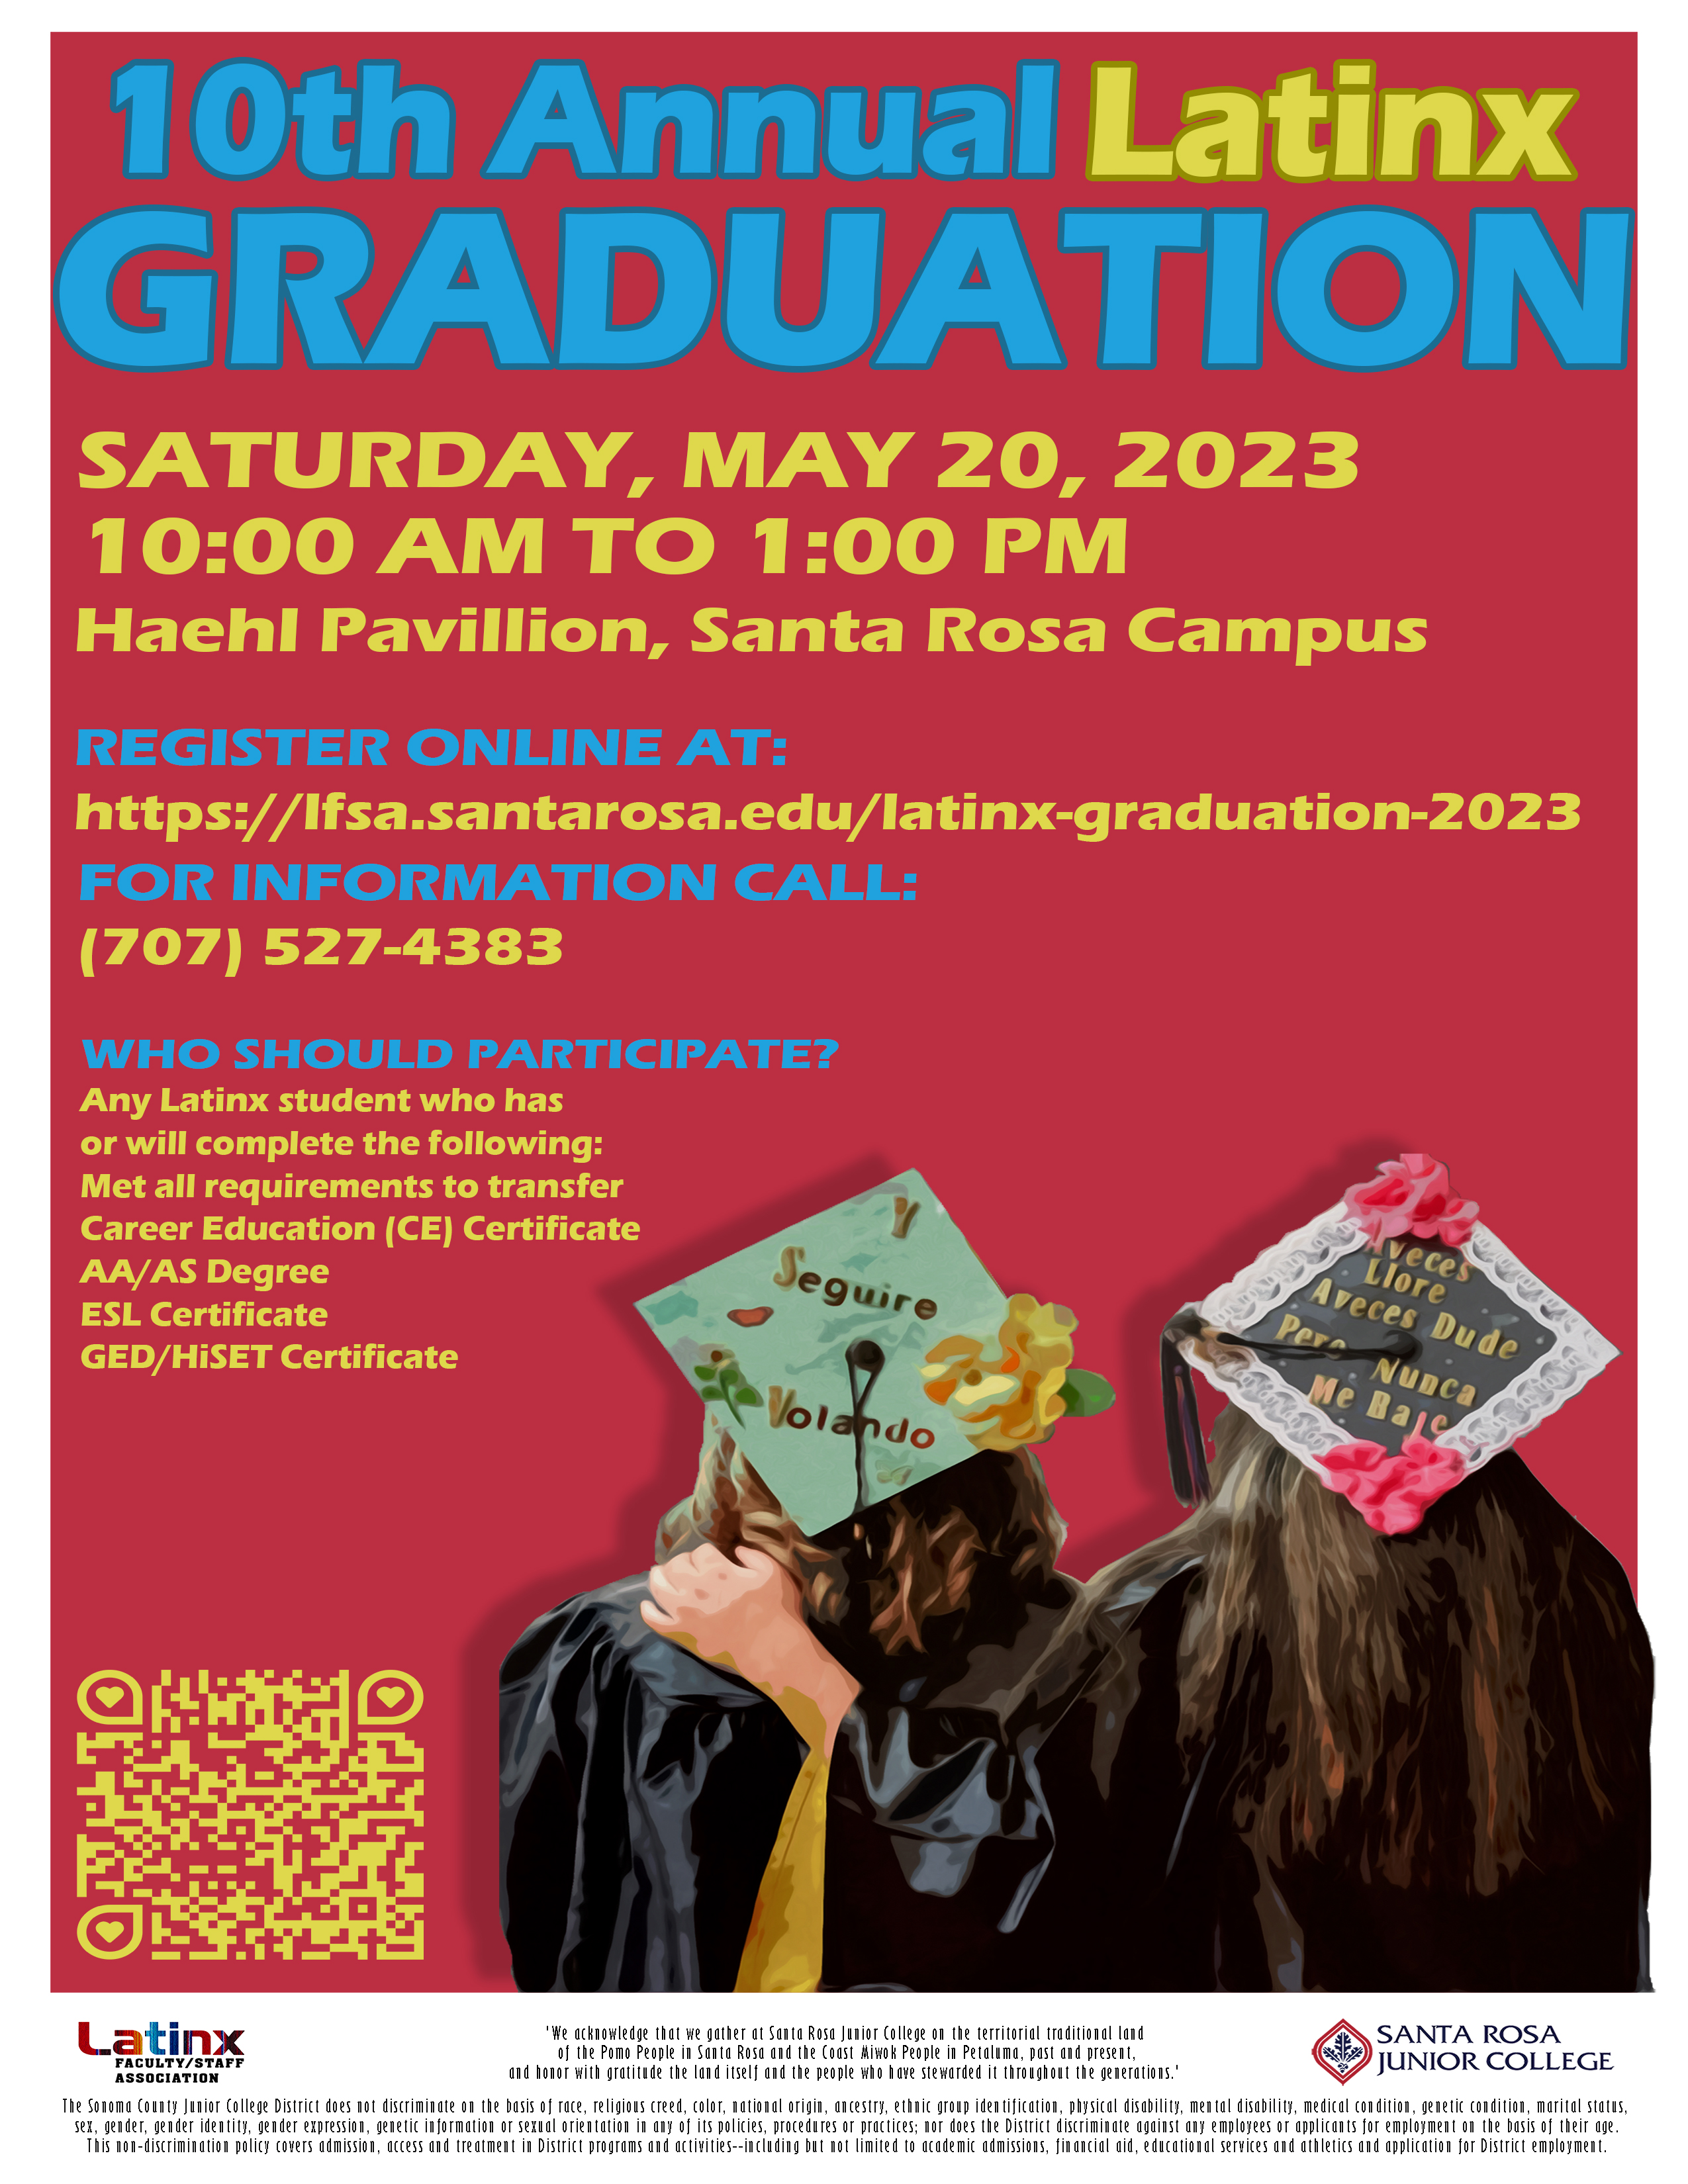 Dear College Community and SRJC Students,  Registration link to the 10th Annual Latinx Graduation is now available.        We are excited to honor the Latinx Graduates this year with an in-person celebration on Saturday, May 20th, from 10am – 1pm.  The Latinx Graduation honors student’s multiple achievements.  Students are eligible to apply if they have received or will receive any of the following this (2022-23) academic year:   Acceptance to transfer to a four-year university AA/AS Degree Career Education (CE) Certificate or Adult Education Certificate ESL Credit/Non-Credit Certificate High School Equivalency Certificate (GED/HiSET) In addition, participating students are eligible to apply for the Latinx Graduation Scholarship.  Information on how to apply to this scholarship will be given to students once they fill out the 2023 Latinx Graduation Registration Form.     Please help us spread the word and share with interested students.     For questions, please call (707) 527-4383 or send an email to bcamargo@santarosa.edu.